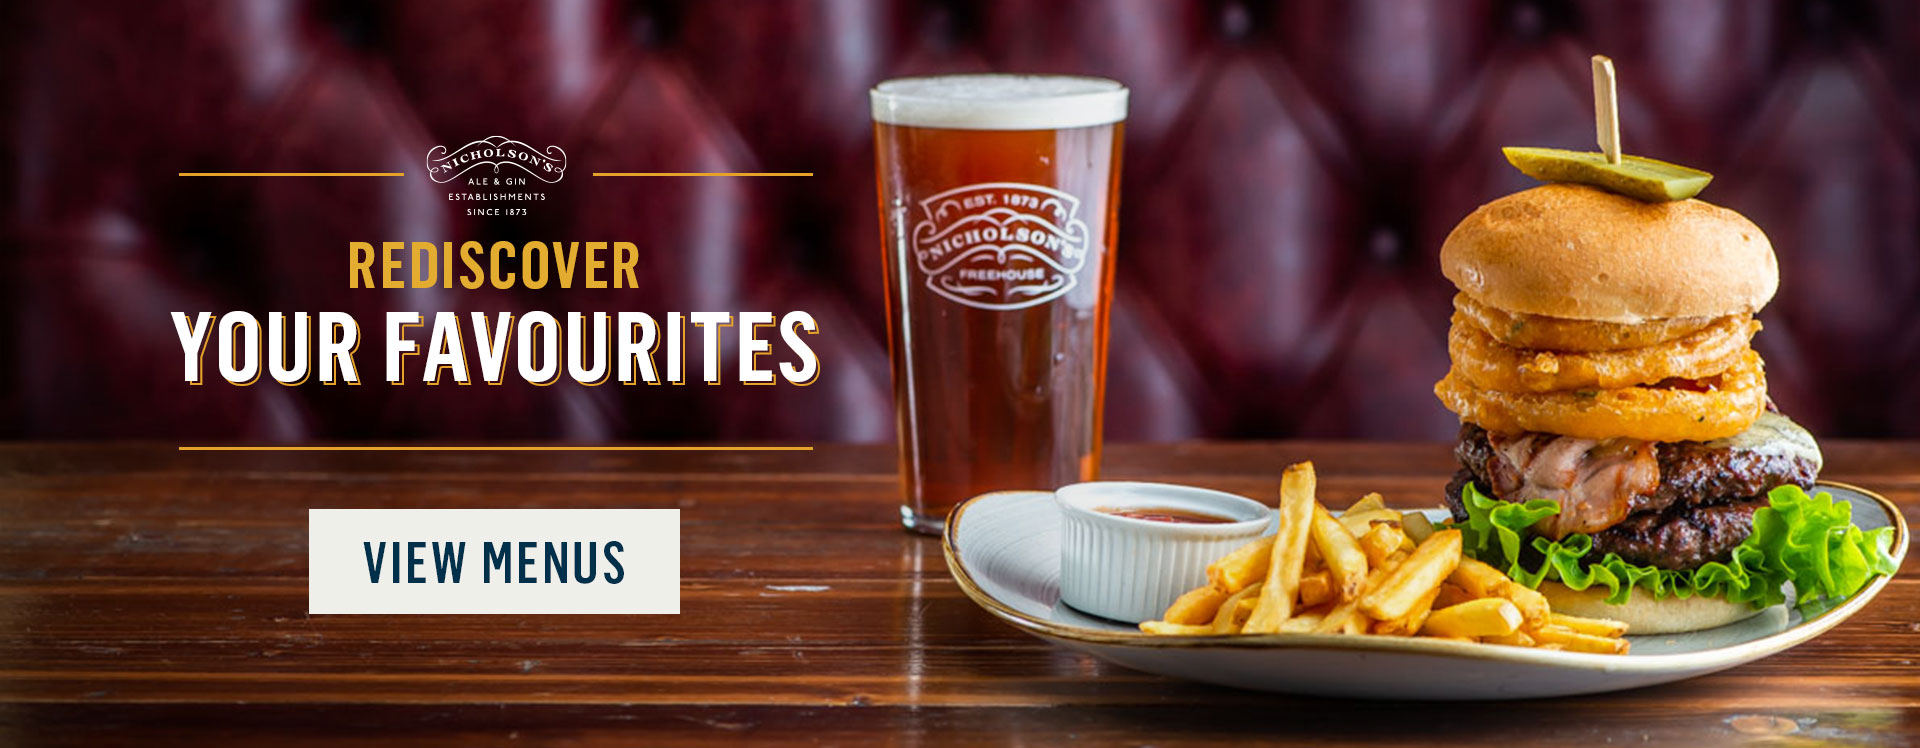 Rediscover your favourites at The Railway Tavern